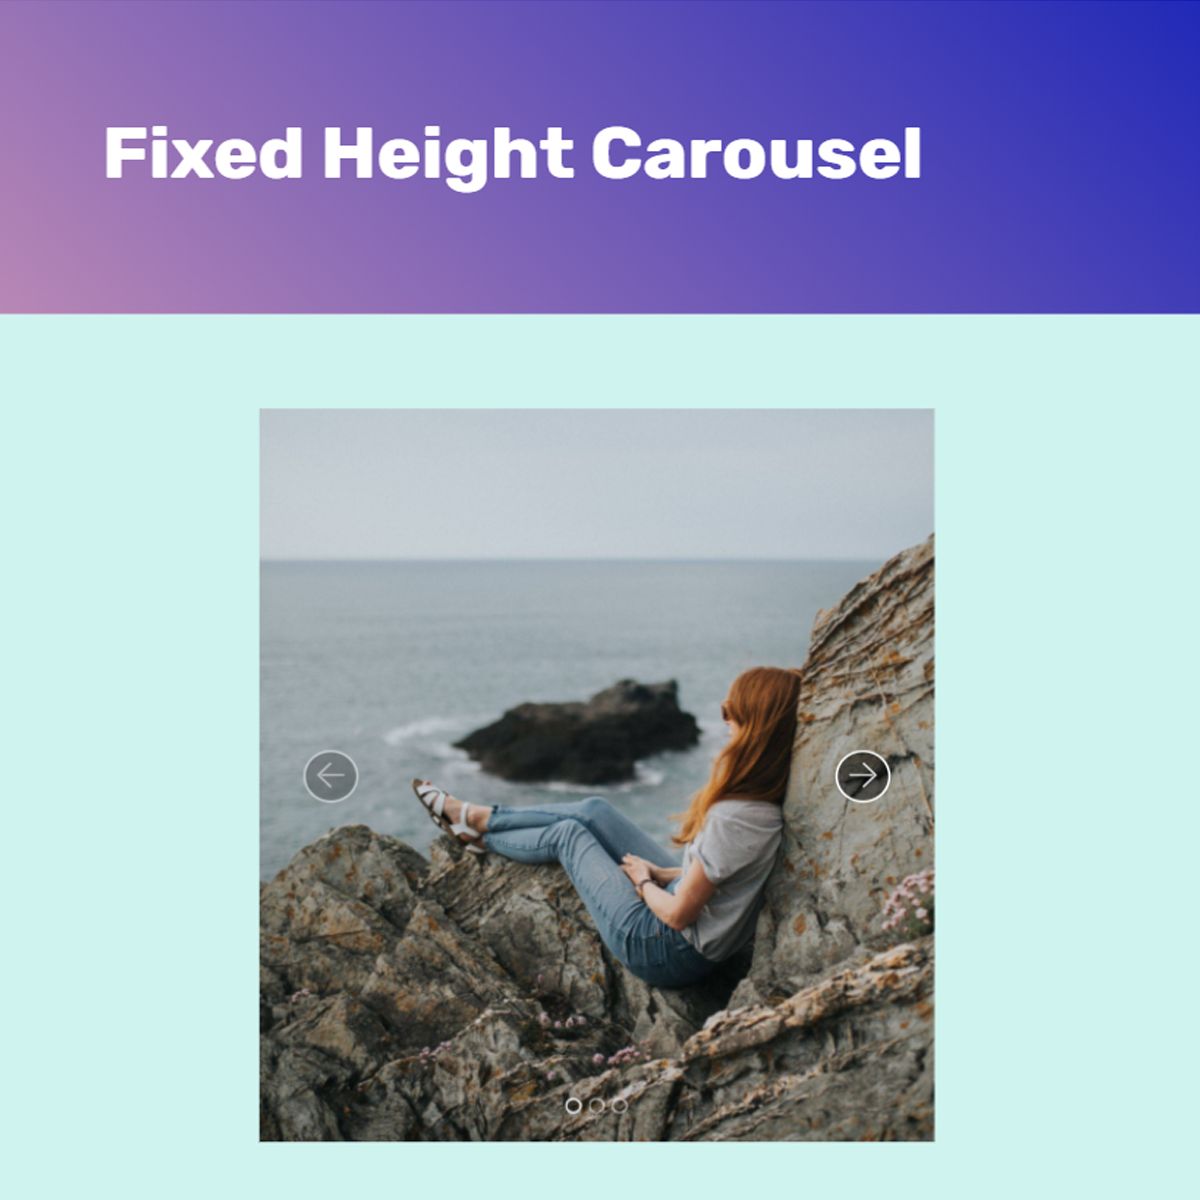 Responsive Bootstrap Picture Carousel